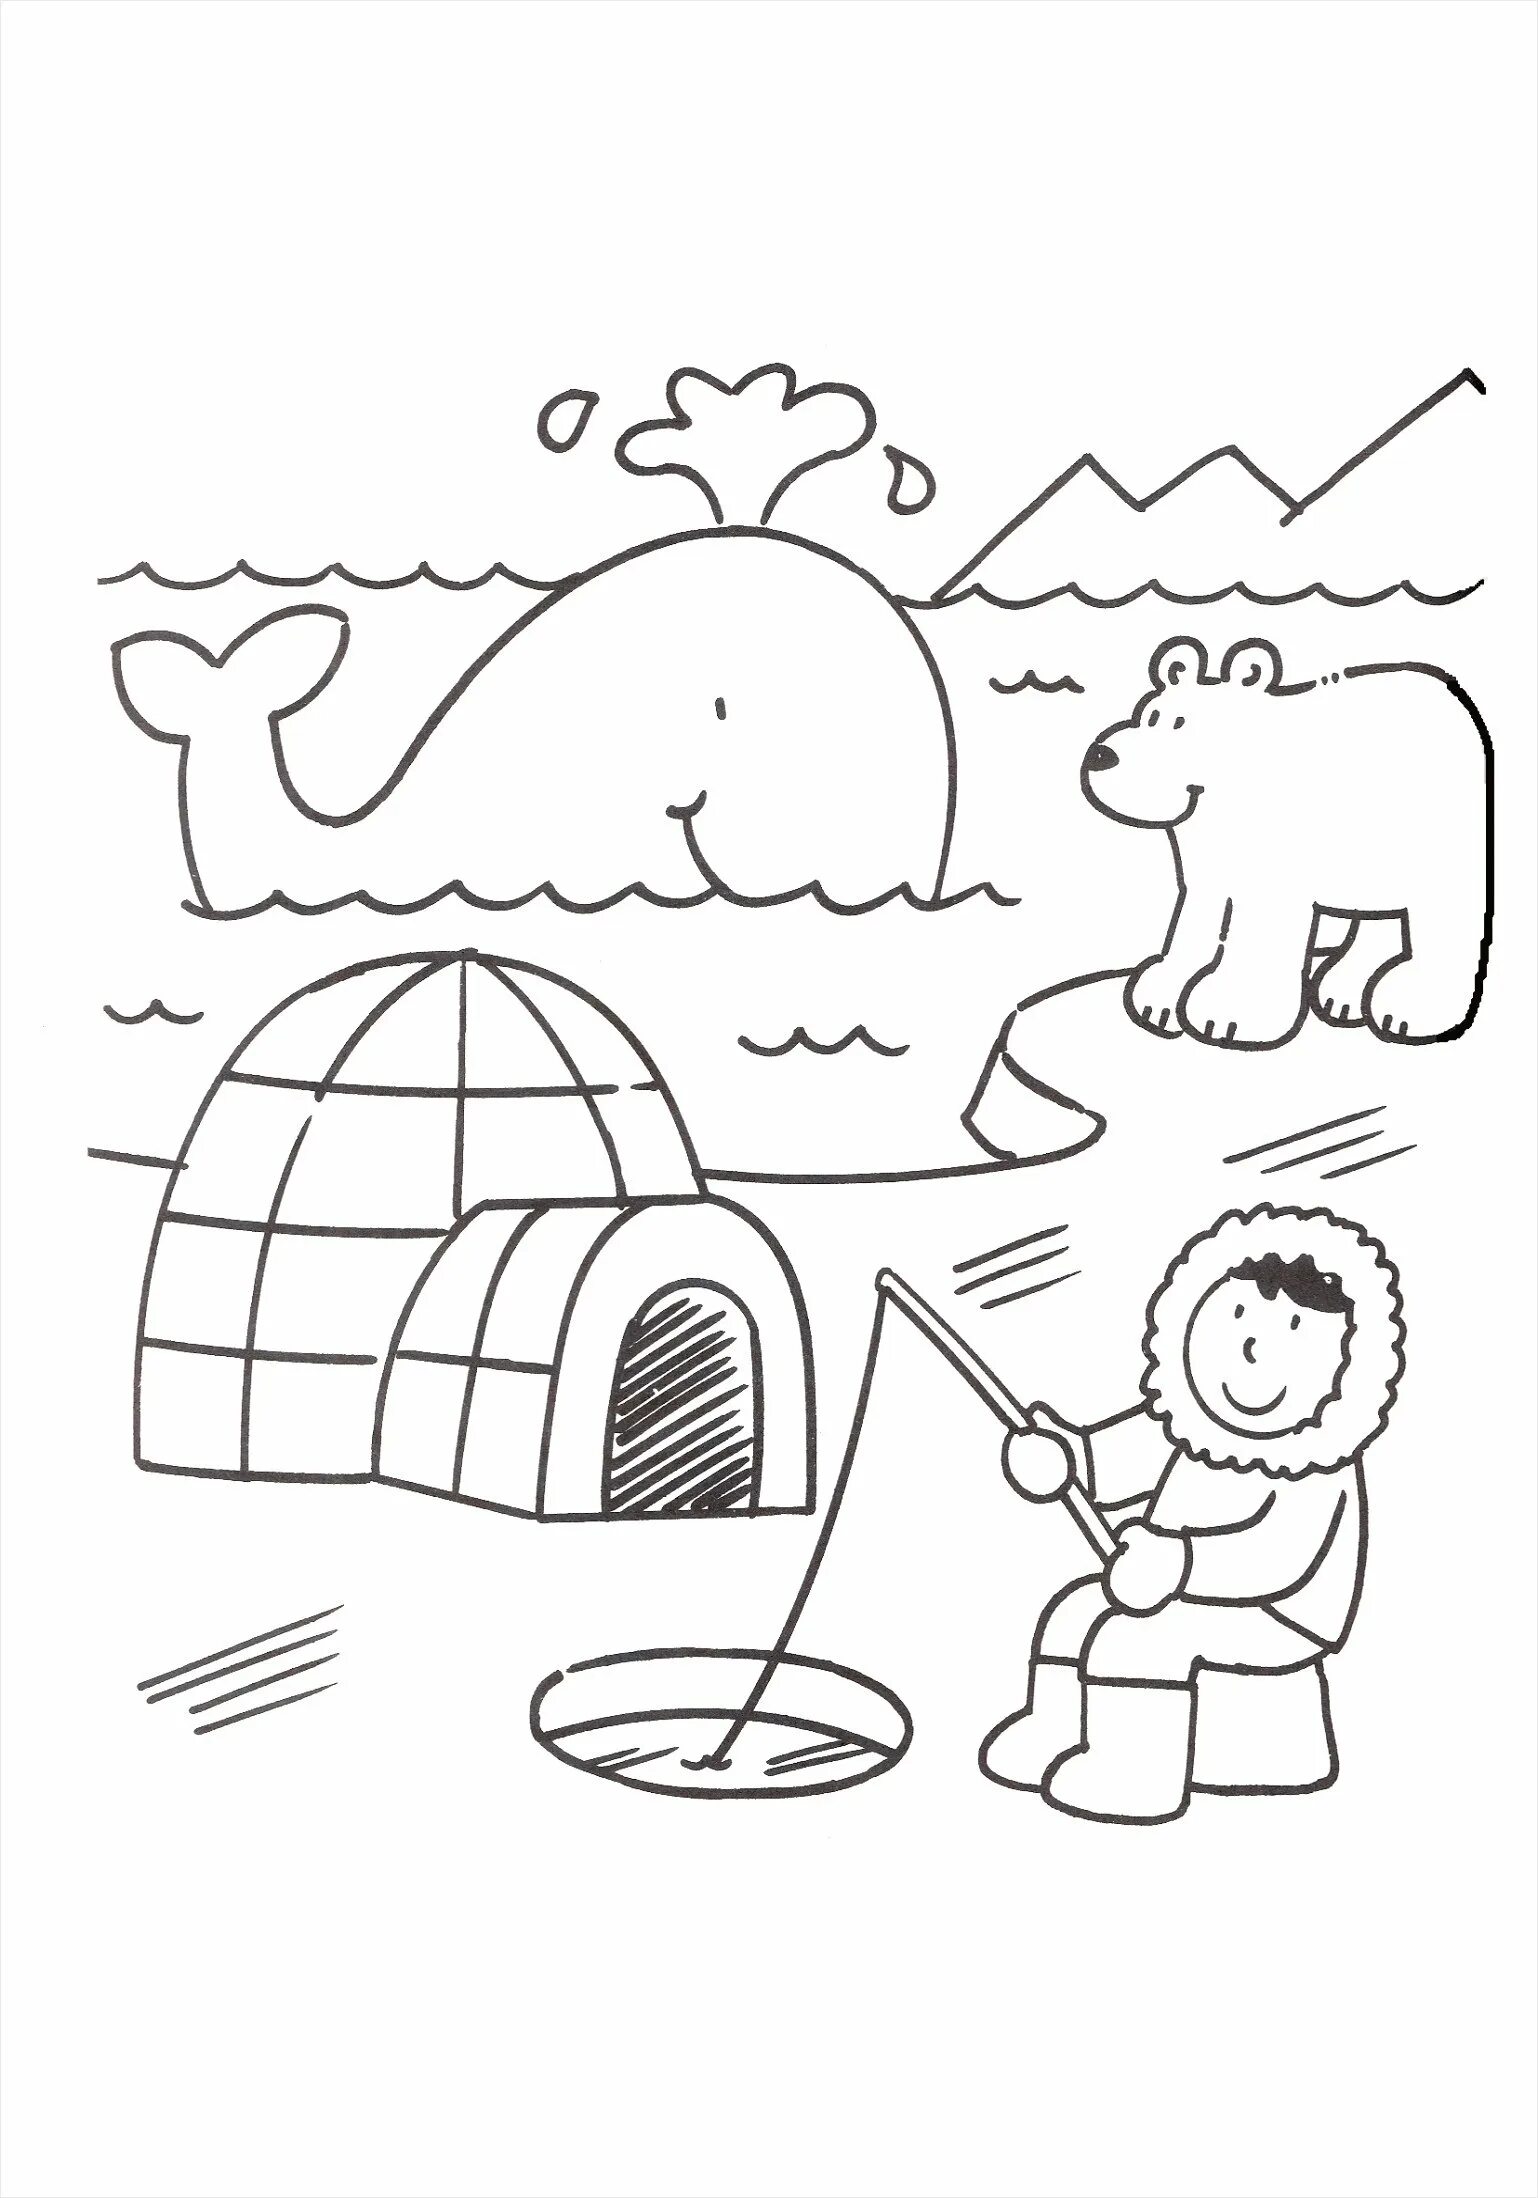 Northern live coloring book for kids